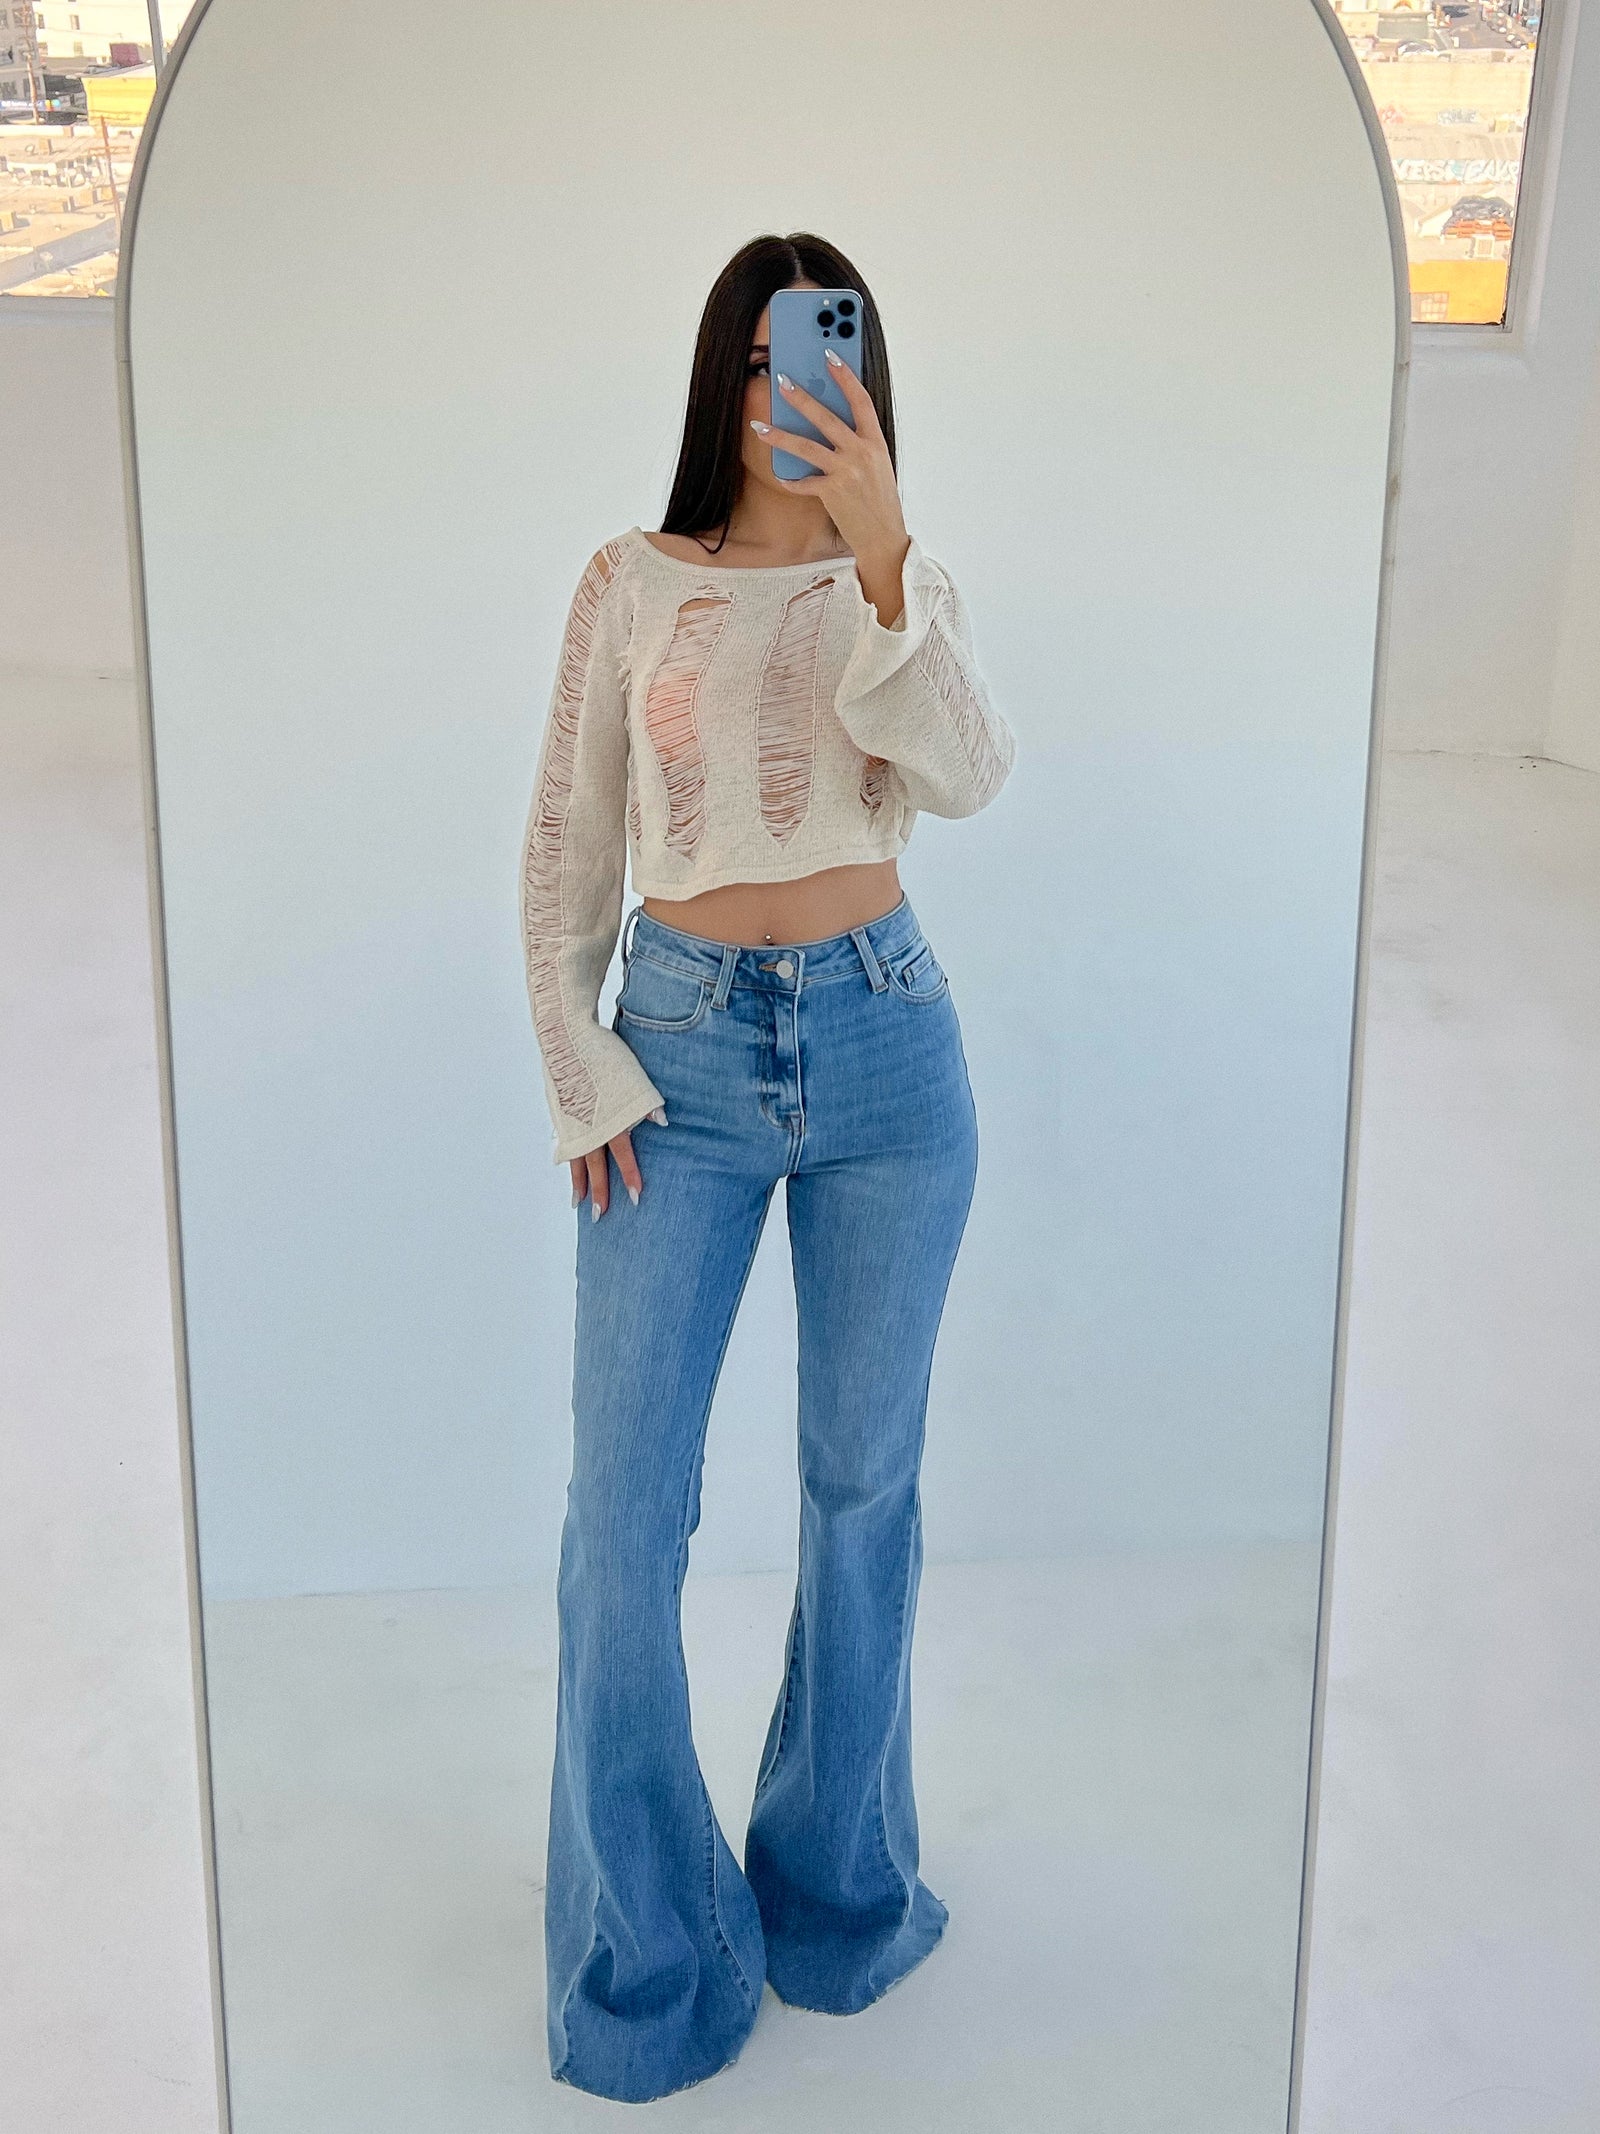 Kior À La Mode on Instagram: “Restock ALERT 🚨 This doll was spotted in our Big  Flare Bell Bottom Jeans! We have restocked these Jeans and also added bigger  siz…